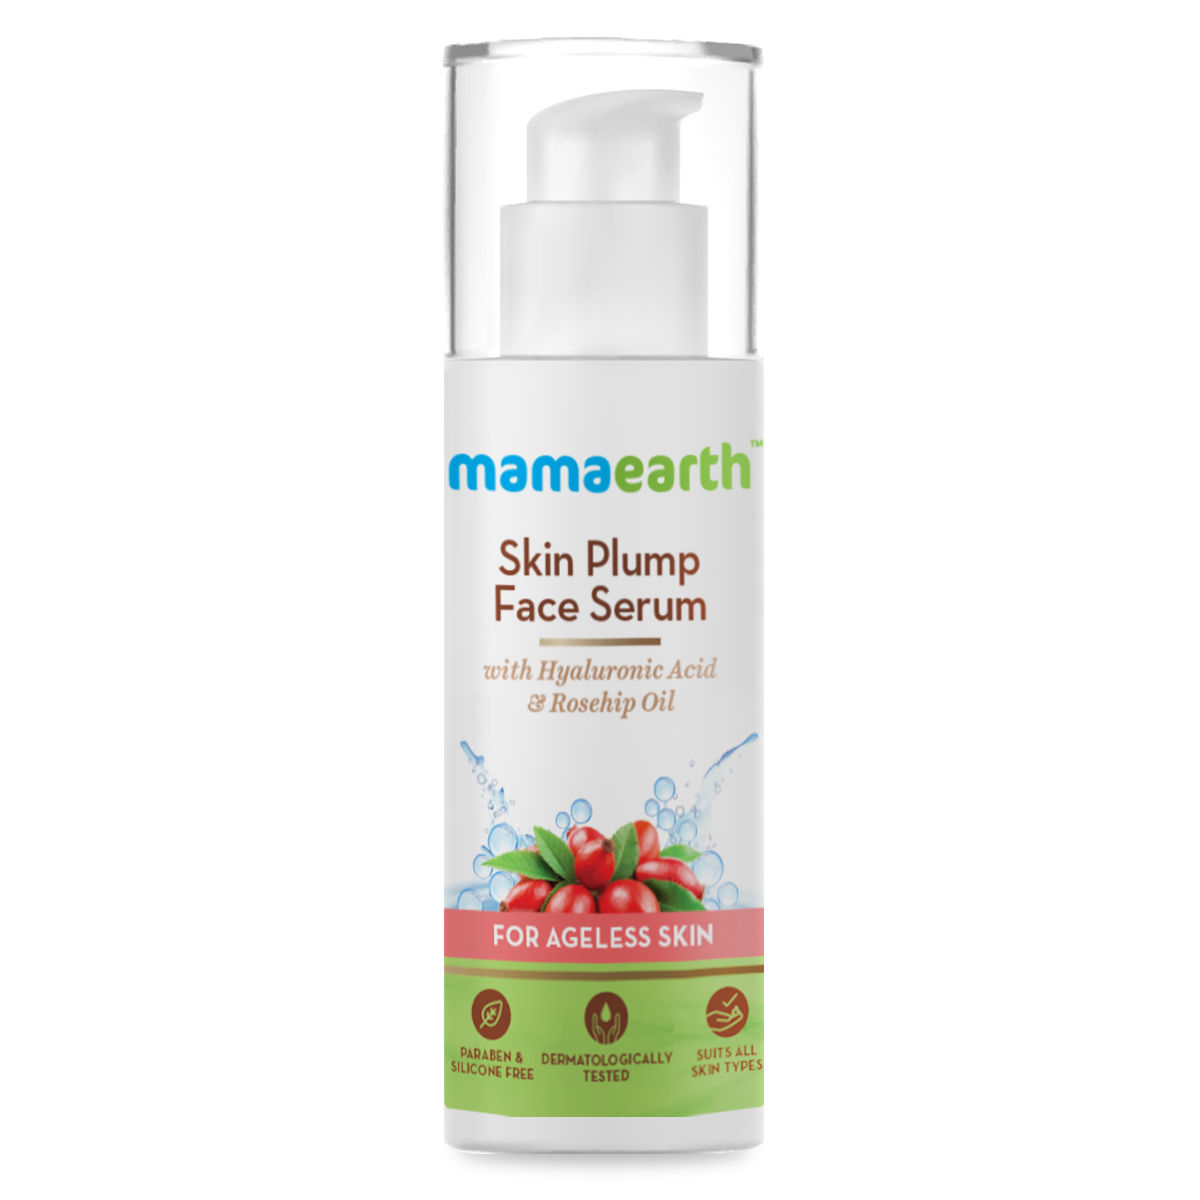 Buy Mamaearth Skin Plump Serum For Face Glow, with Hyaluronic Acid & Rosehip Oil for Ageless Skin (30 ml) - Purplle